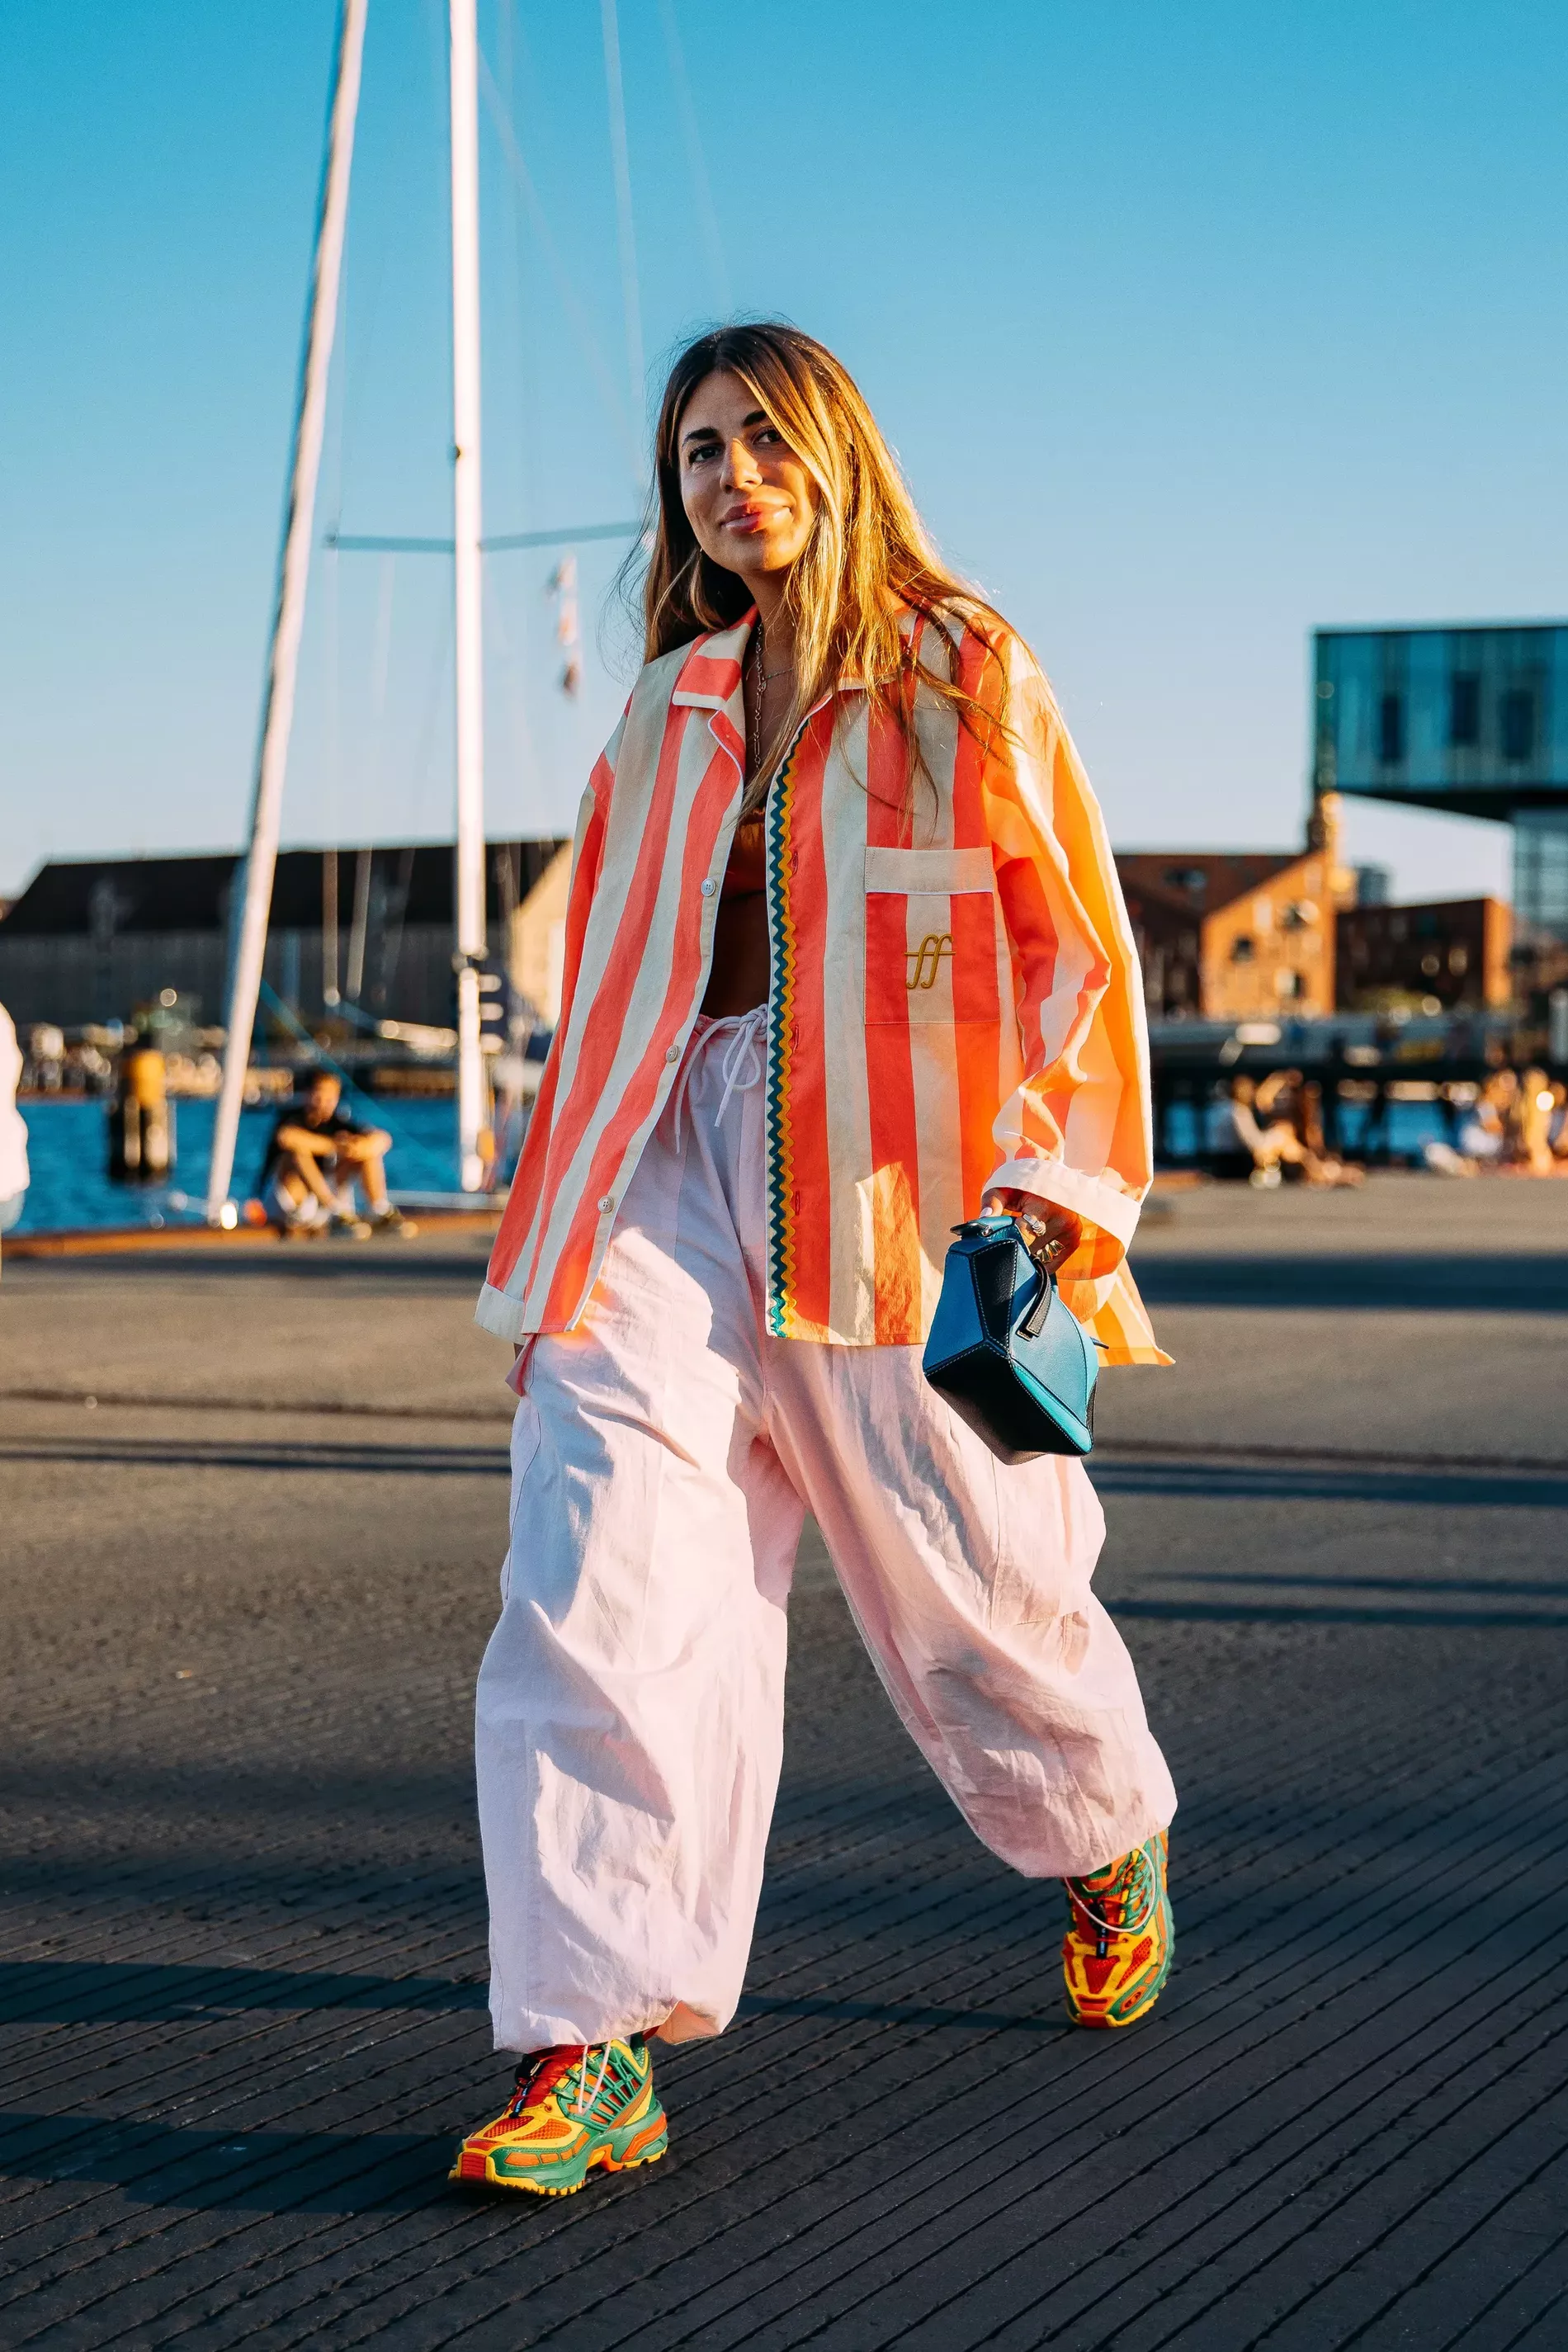 Copenhagen fashion week guest wears striped oversized shirt with pink pants and clutch